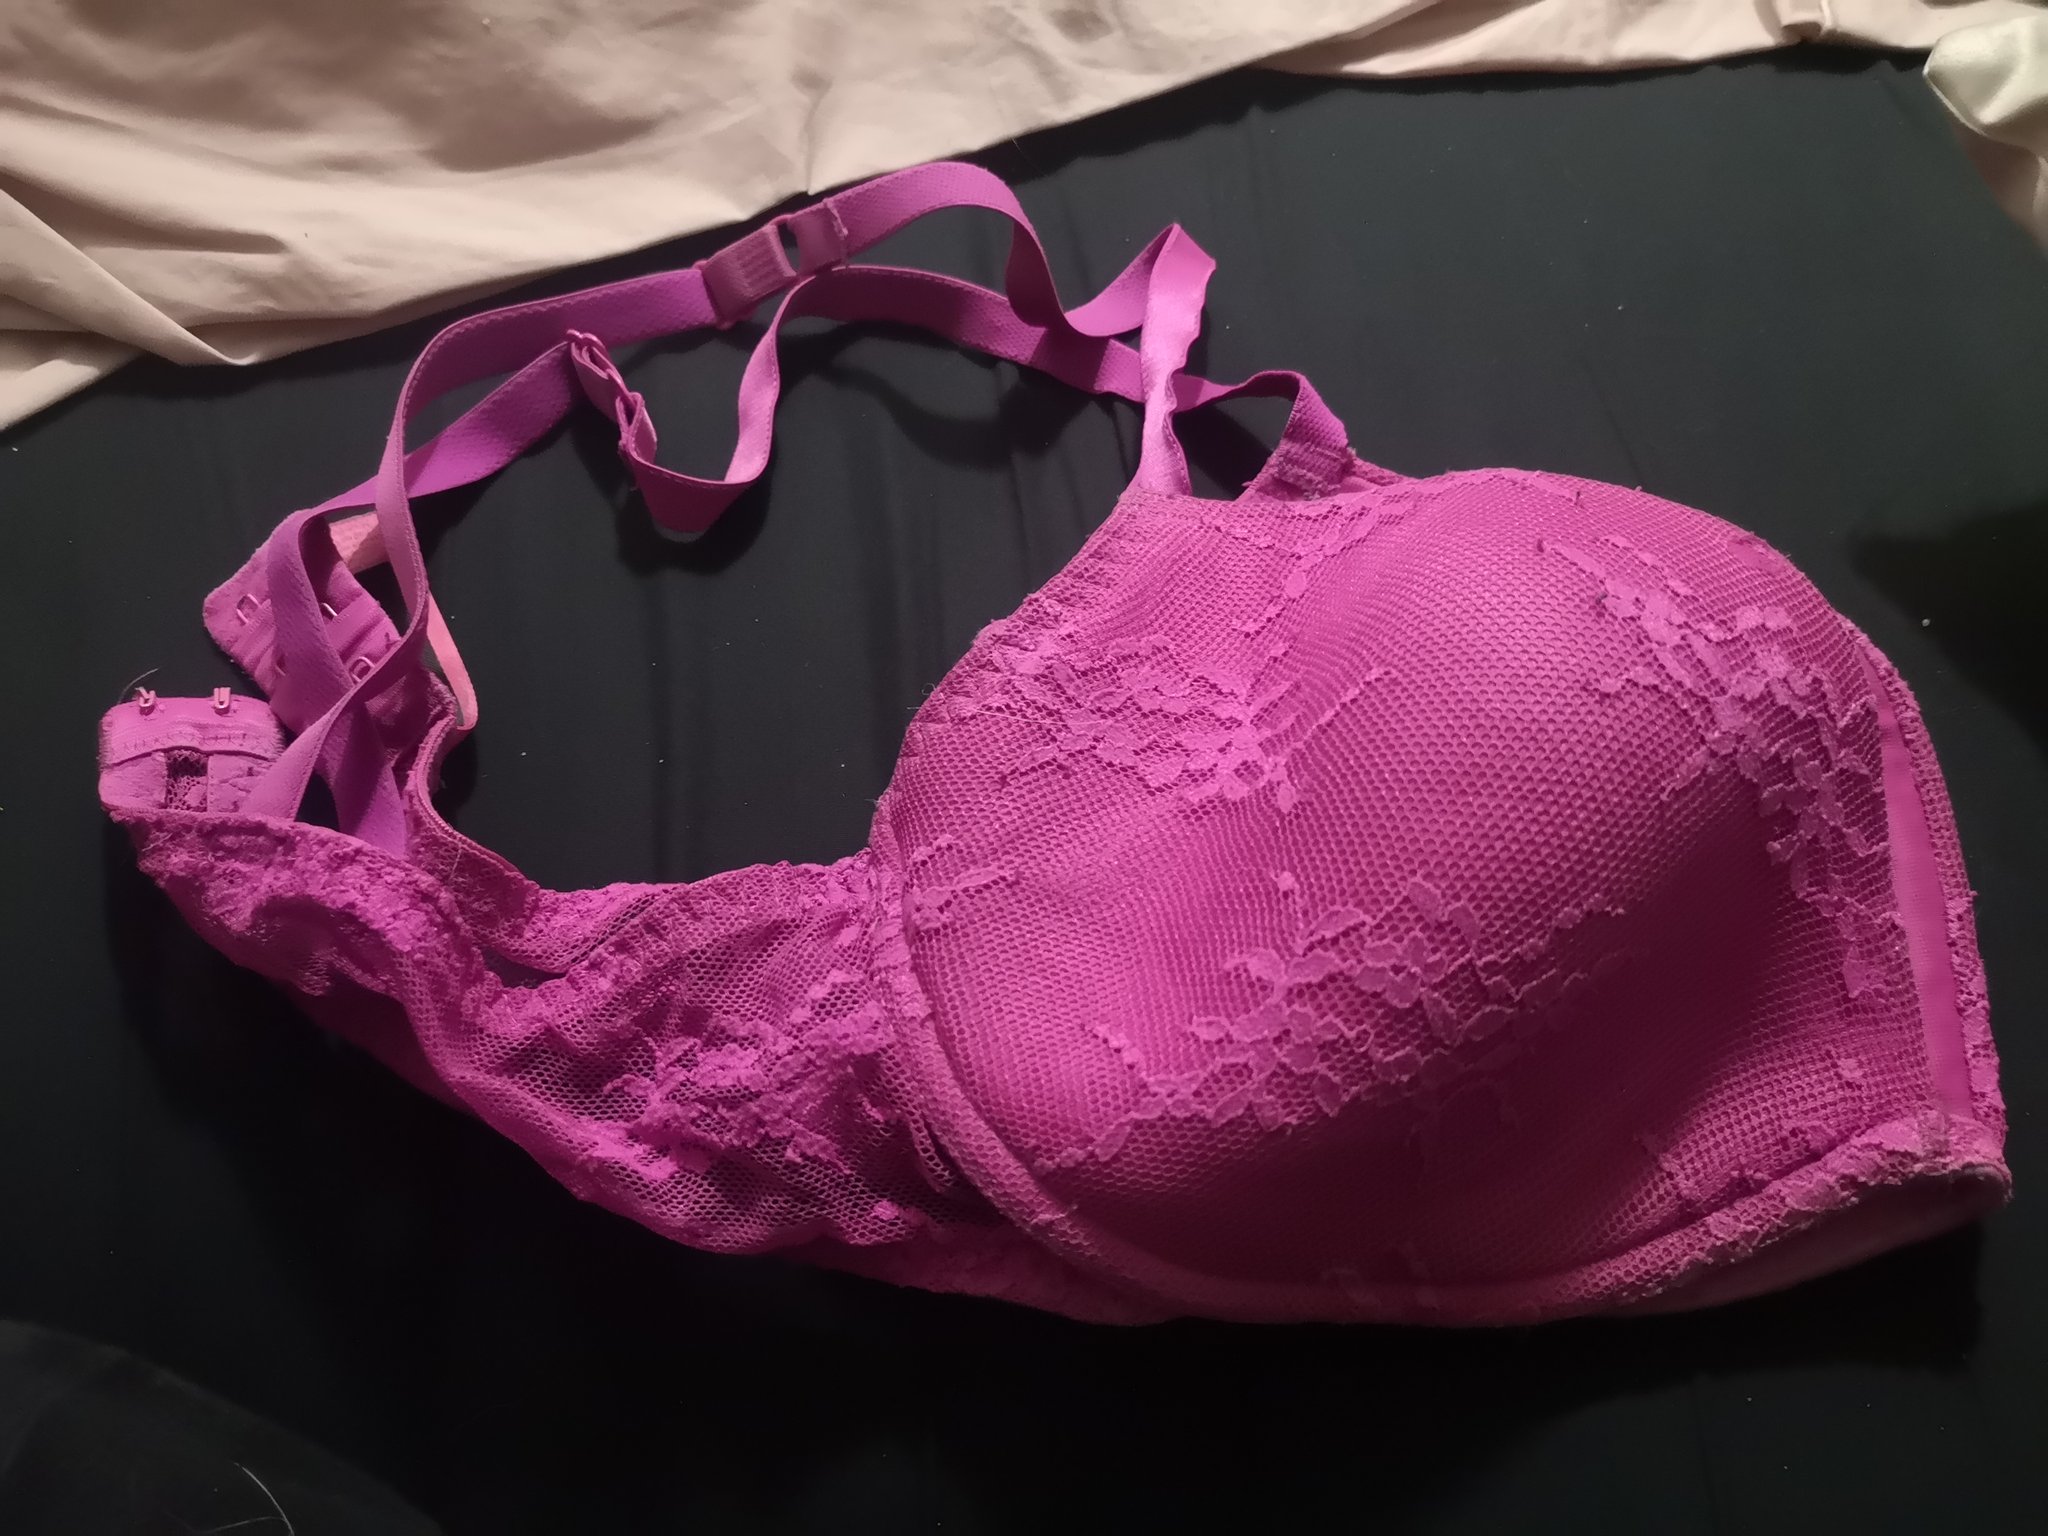 KathRedrum @ OF 60% OFF on X: Anyone interested in buying my used bra off  of me? $20. DM for details, serious inquiries only. #bra #usedbra  #braforsell #pantiesforsell #sellingbra #pinkbra  /